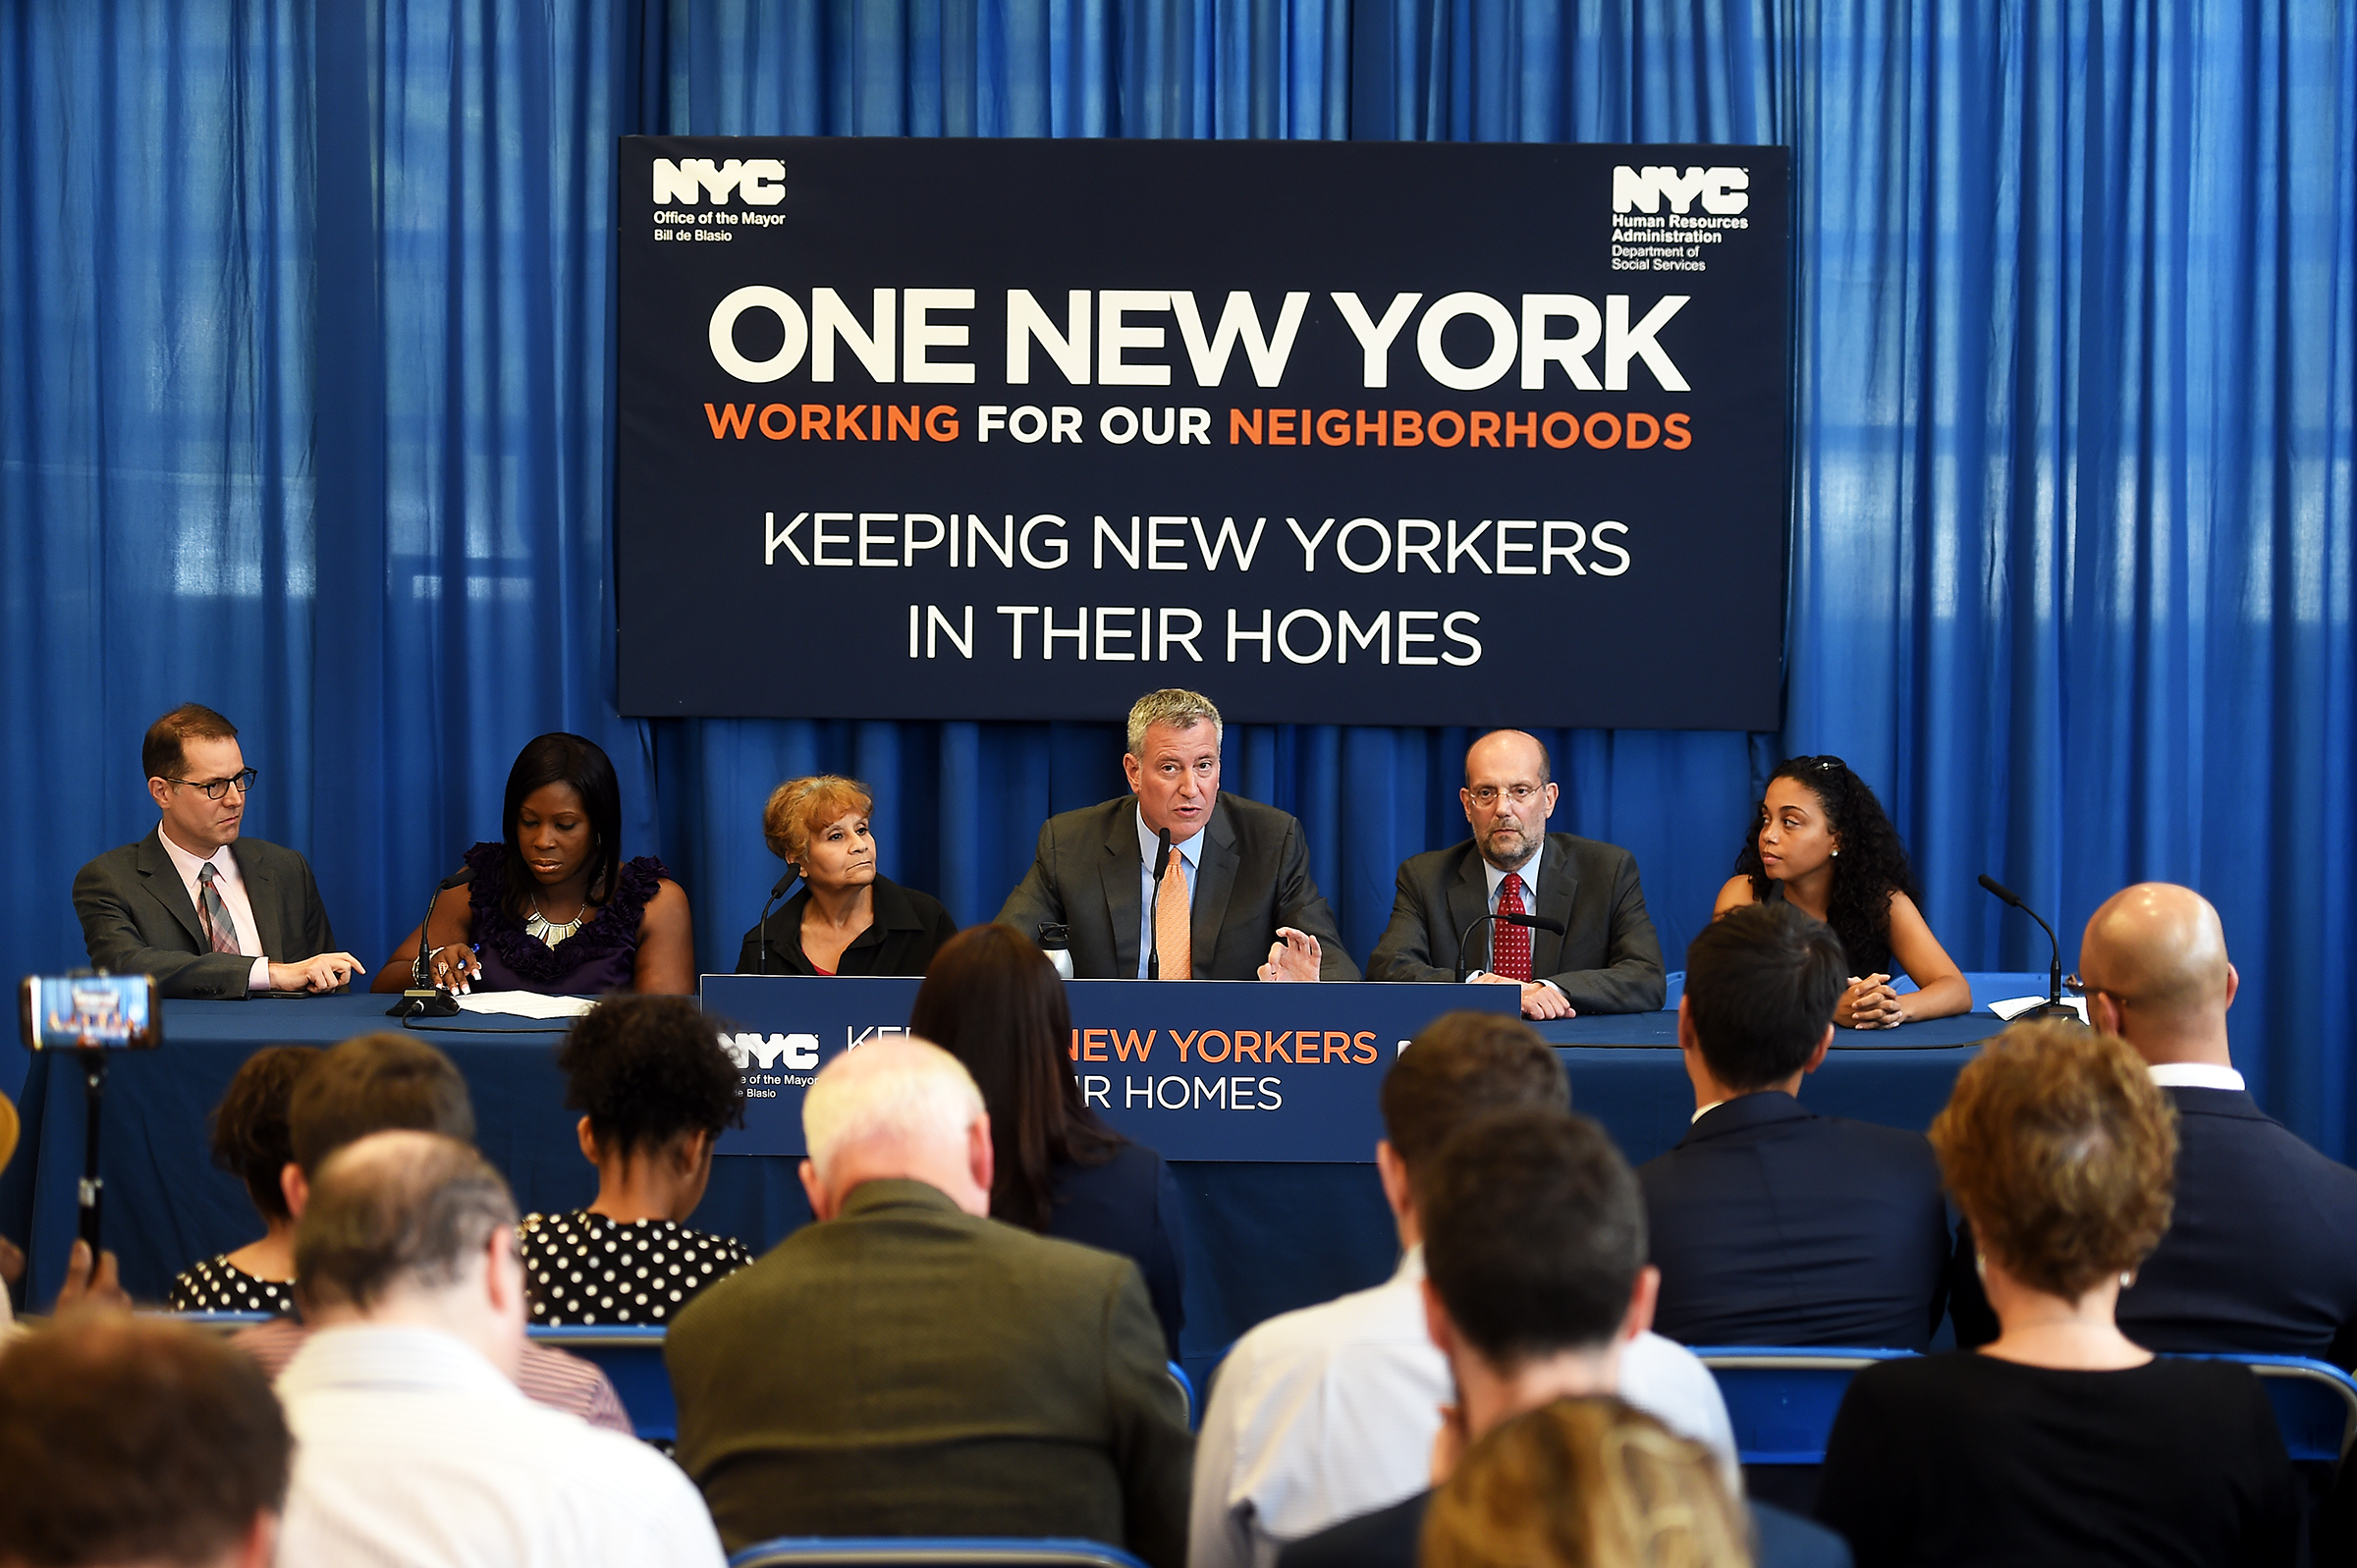 Mayor Bill de Blasio makes an announcement regarding legal representation for tenants in housing court at the High Bridge Library in the Bronx, New York.